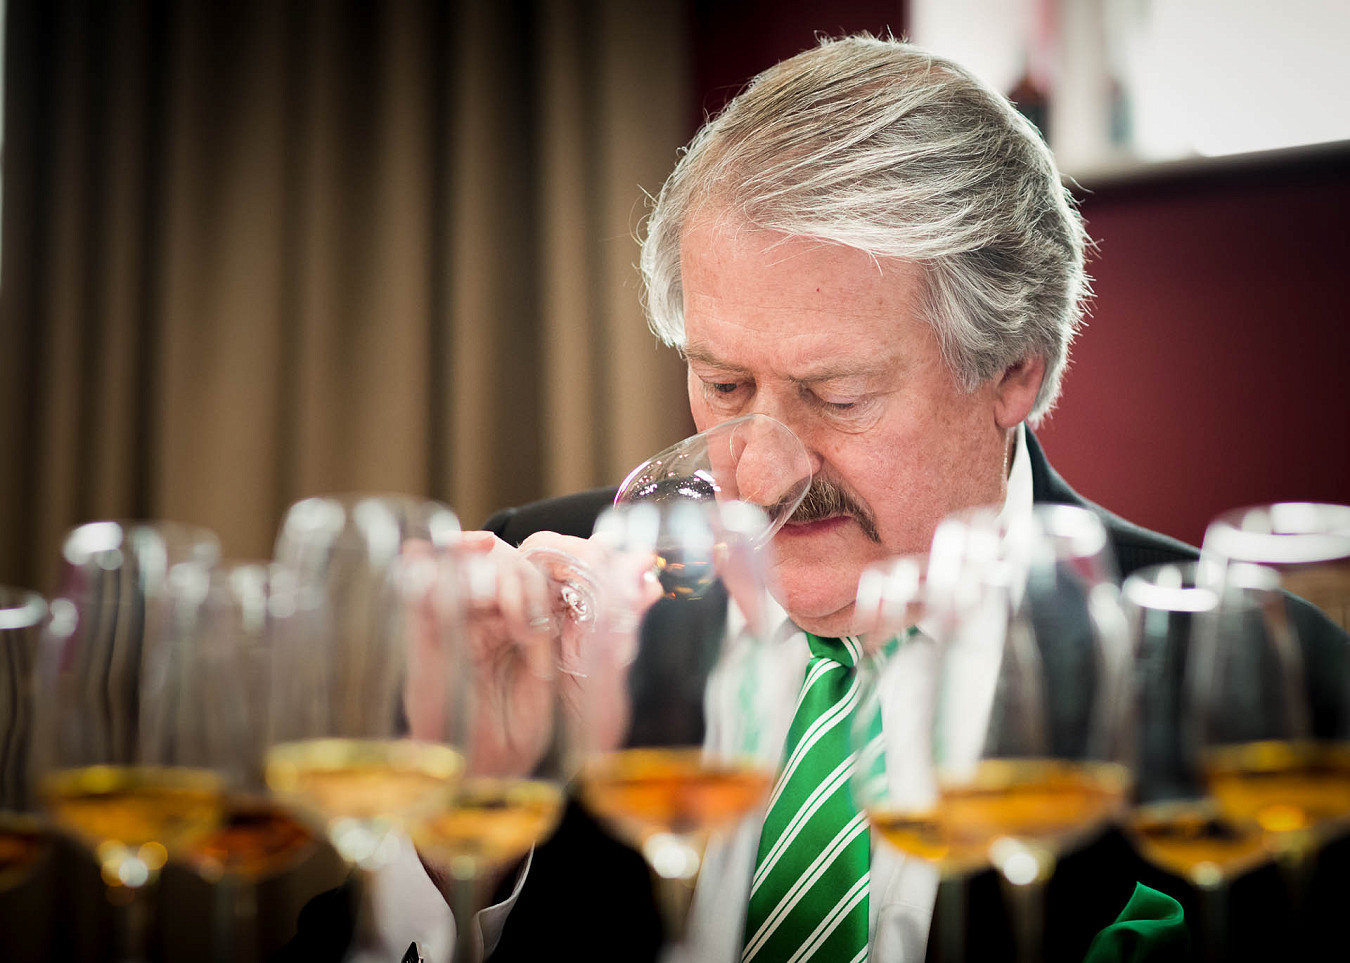 Master blender RIchard Paterson sniffs one whisky from a flight of several glasses of whisky at a judging event